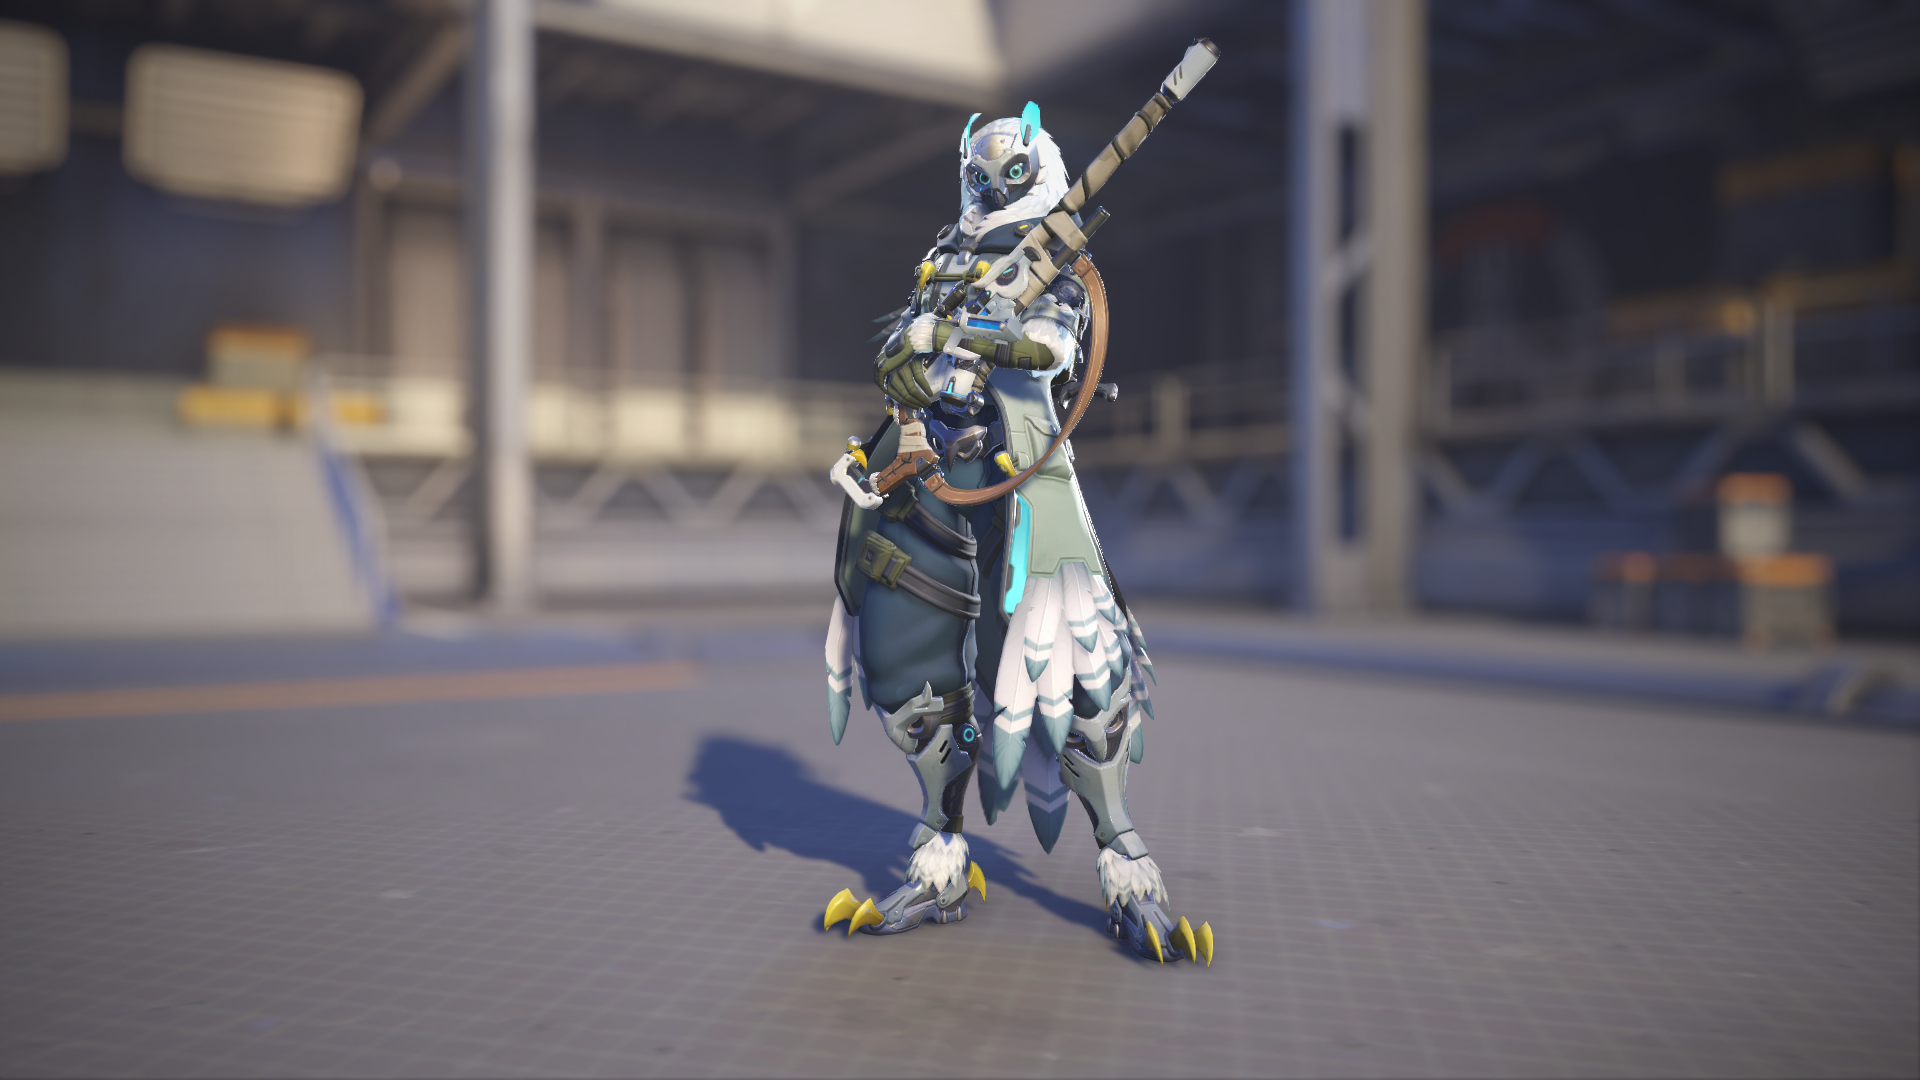 Ana models her Snow Owl skin in Overwatch 2.